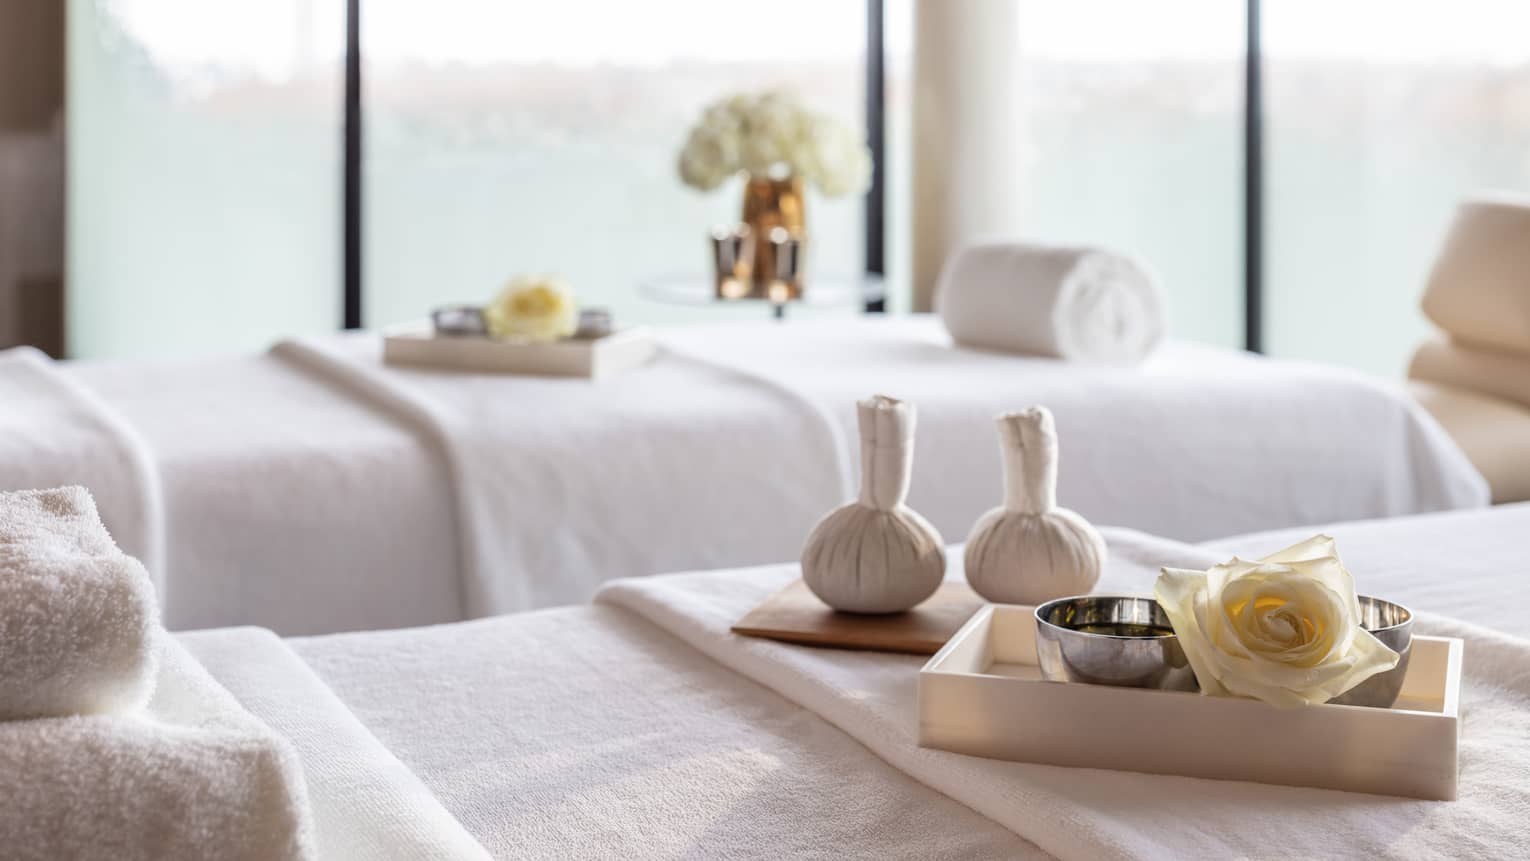 Spa couples treatment room with two white beds, one with tray, bowls and rose